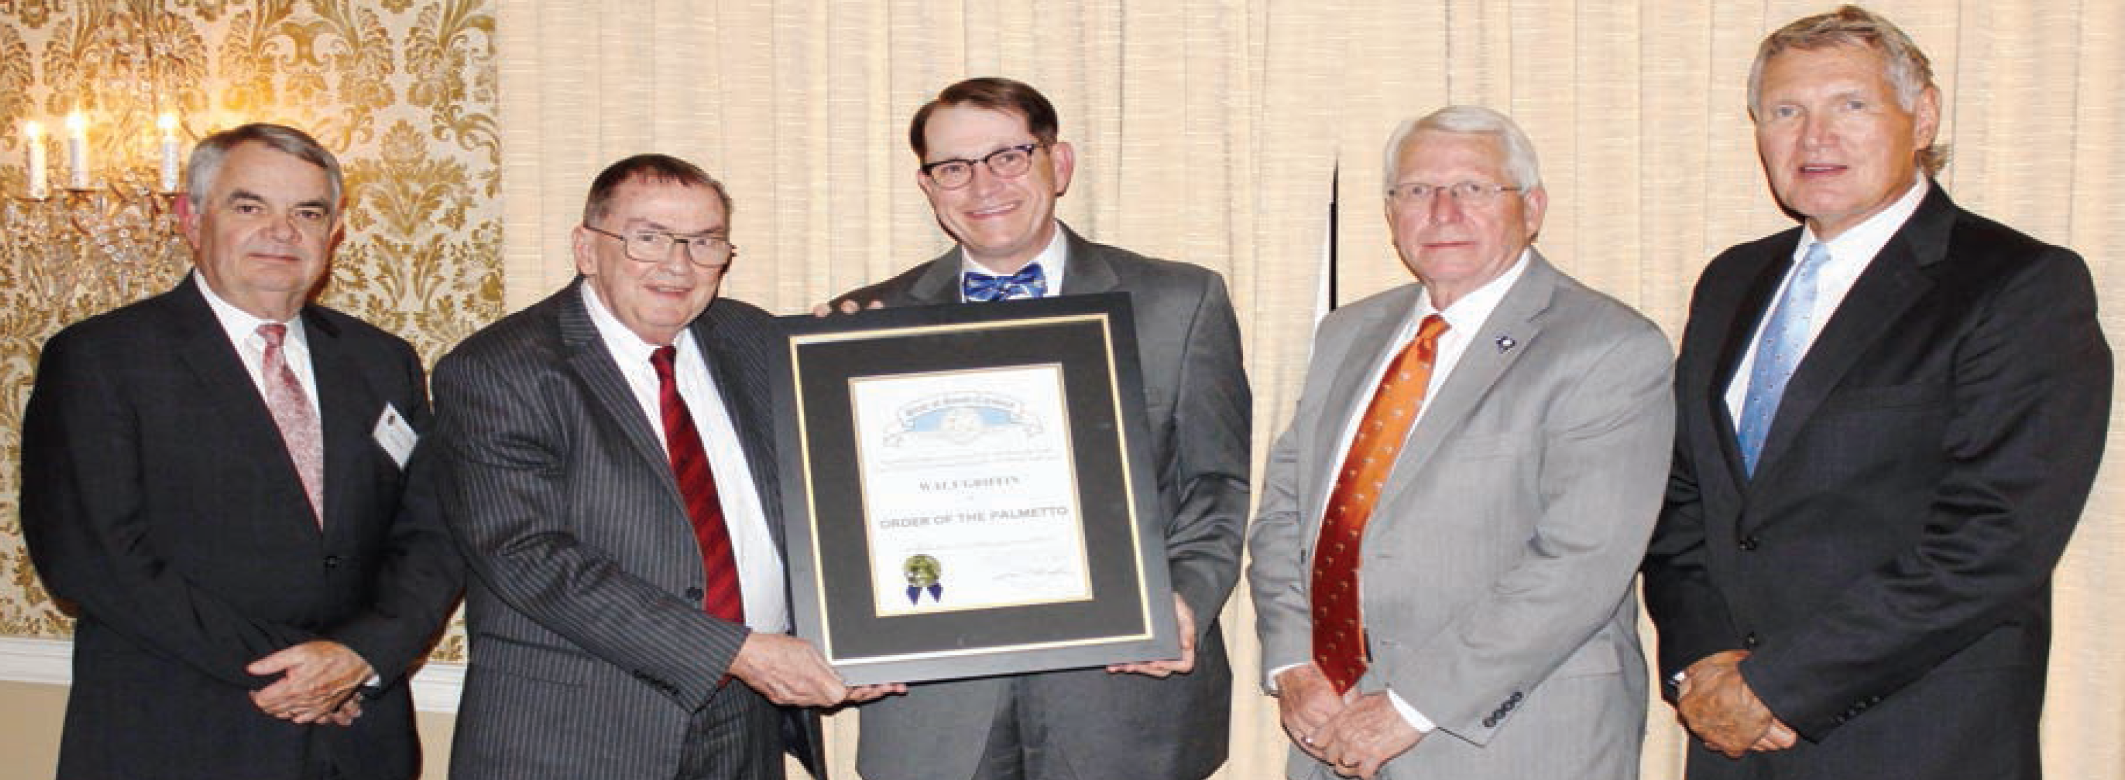 Outgoing Limestone College President Dr. Walt Griffin was presented with The Order of The Palmetto on October 26, 2017 at the Piedmont Club in Spartanburg.